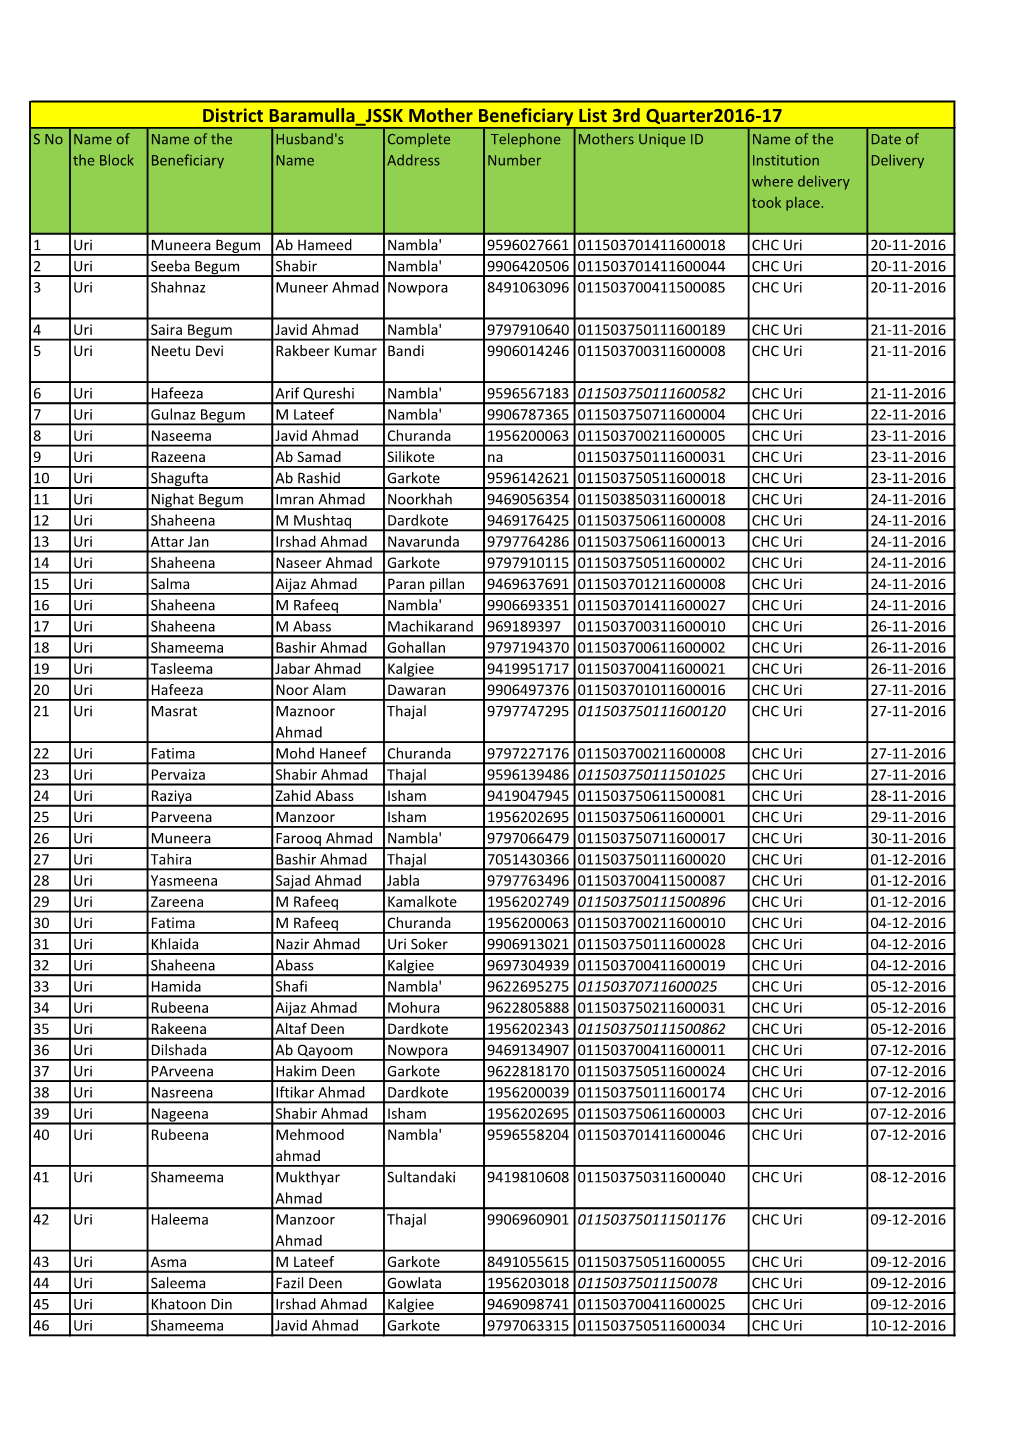 District Baramulla JSSK Mother Beneficiary List 3Rd Quarter2016-17